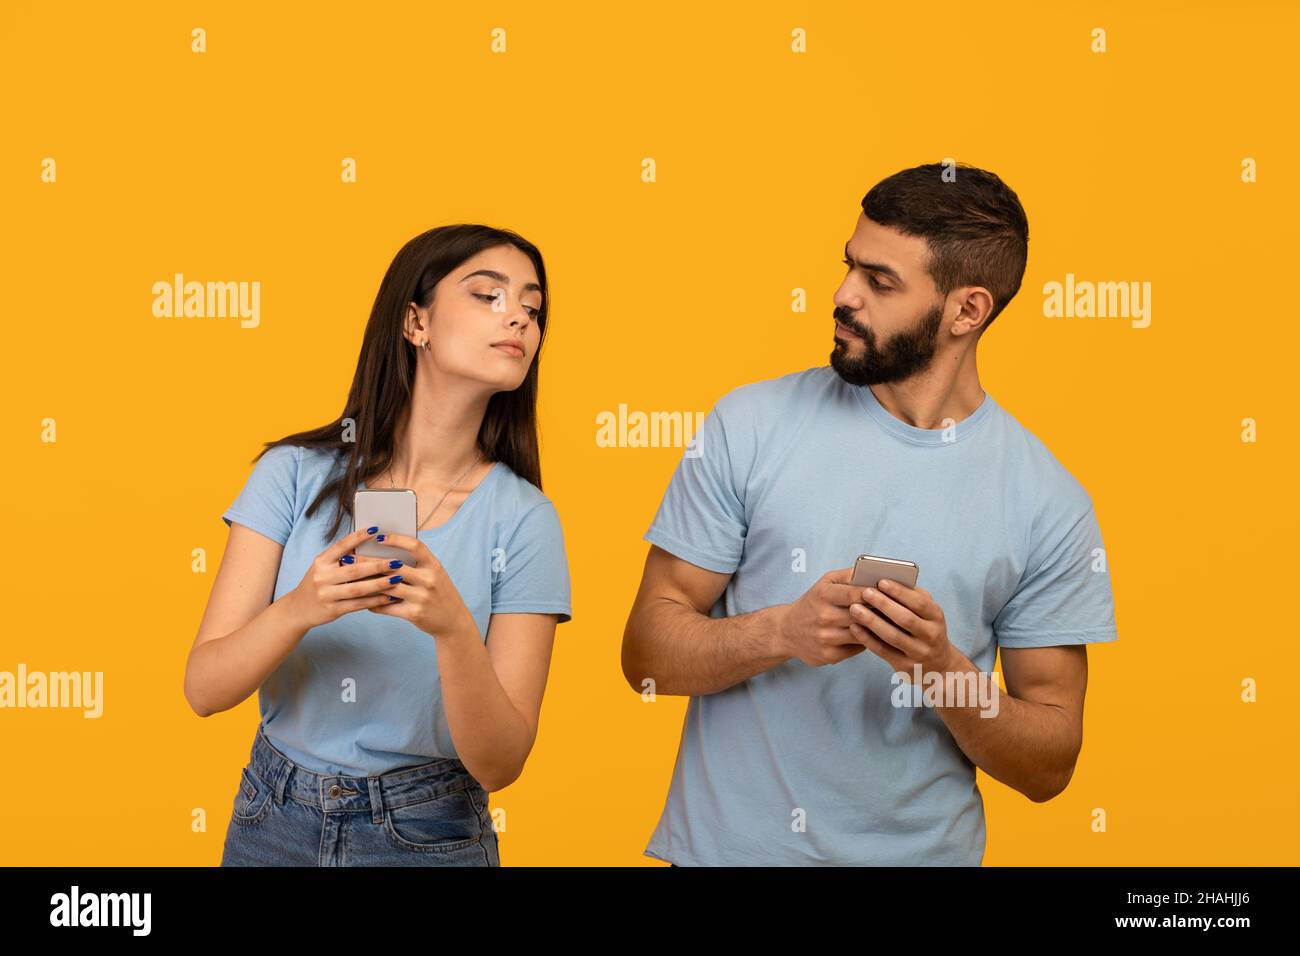 Privacy concept. Arab lady trying to look at her boyfriend's smartphone, guy hiding gadget, yellow studio background Stock Photo